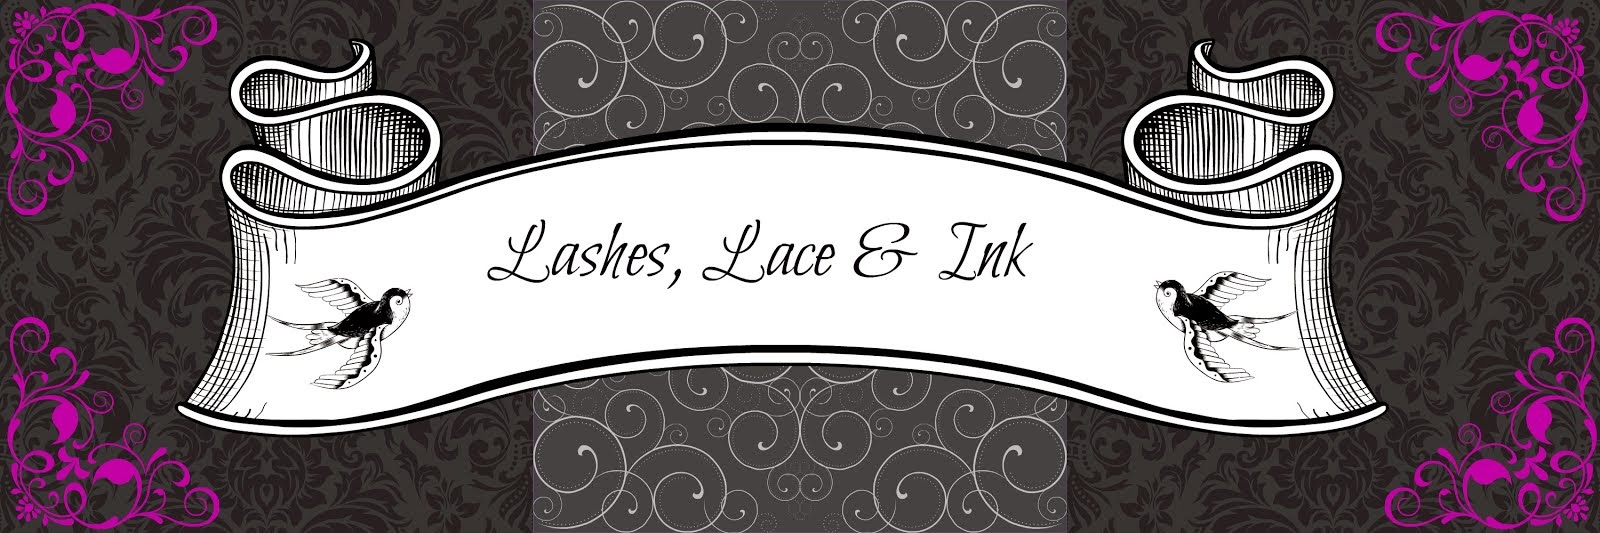 Lashes, Lace & Ink